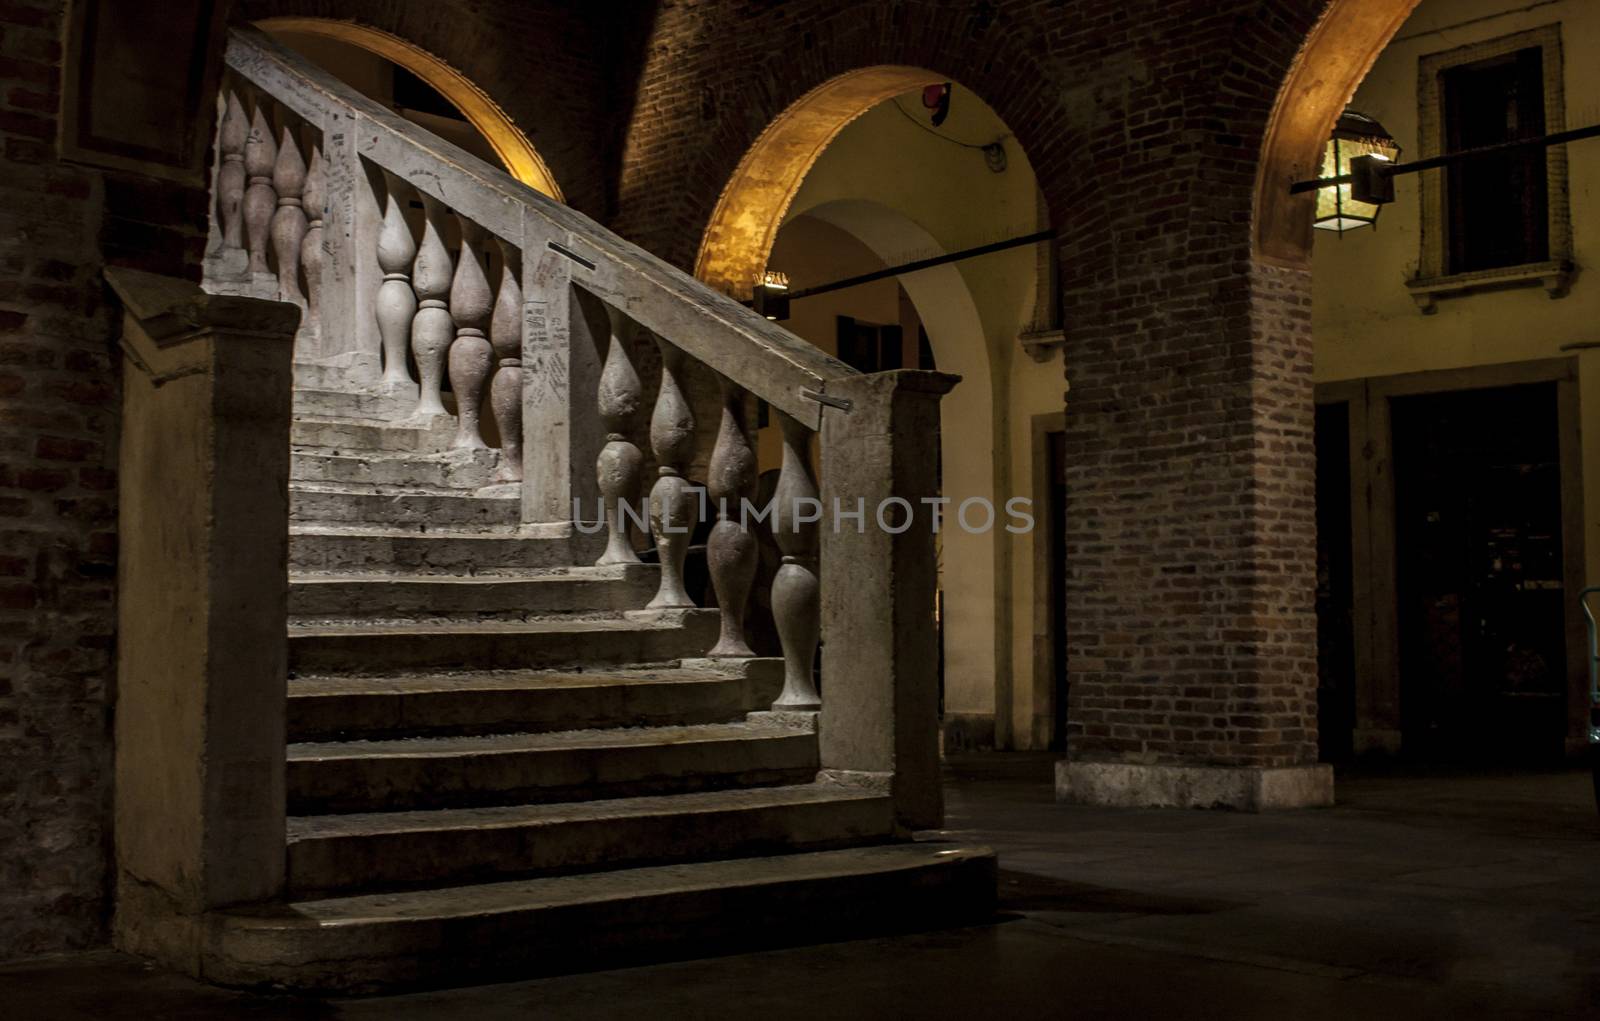 Marble staircase part of a historic building in the square of Rovigo in Italy.